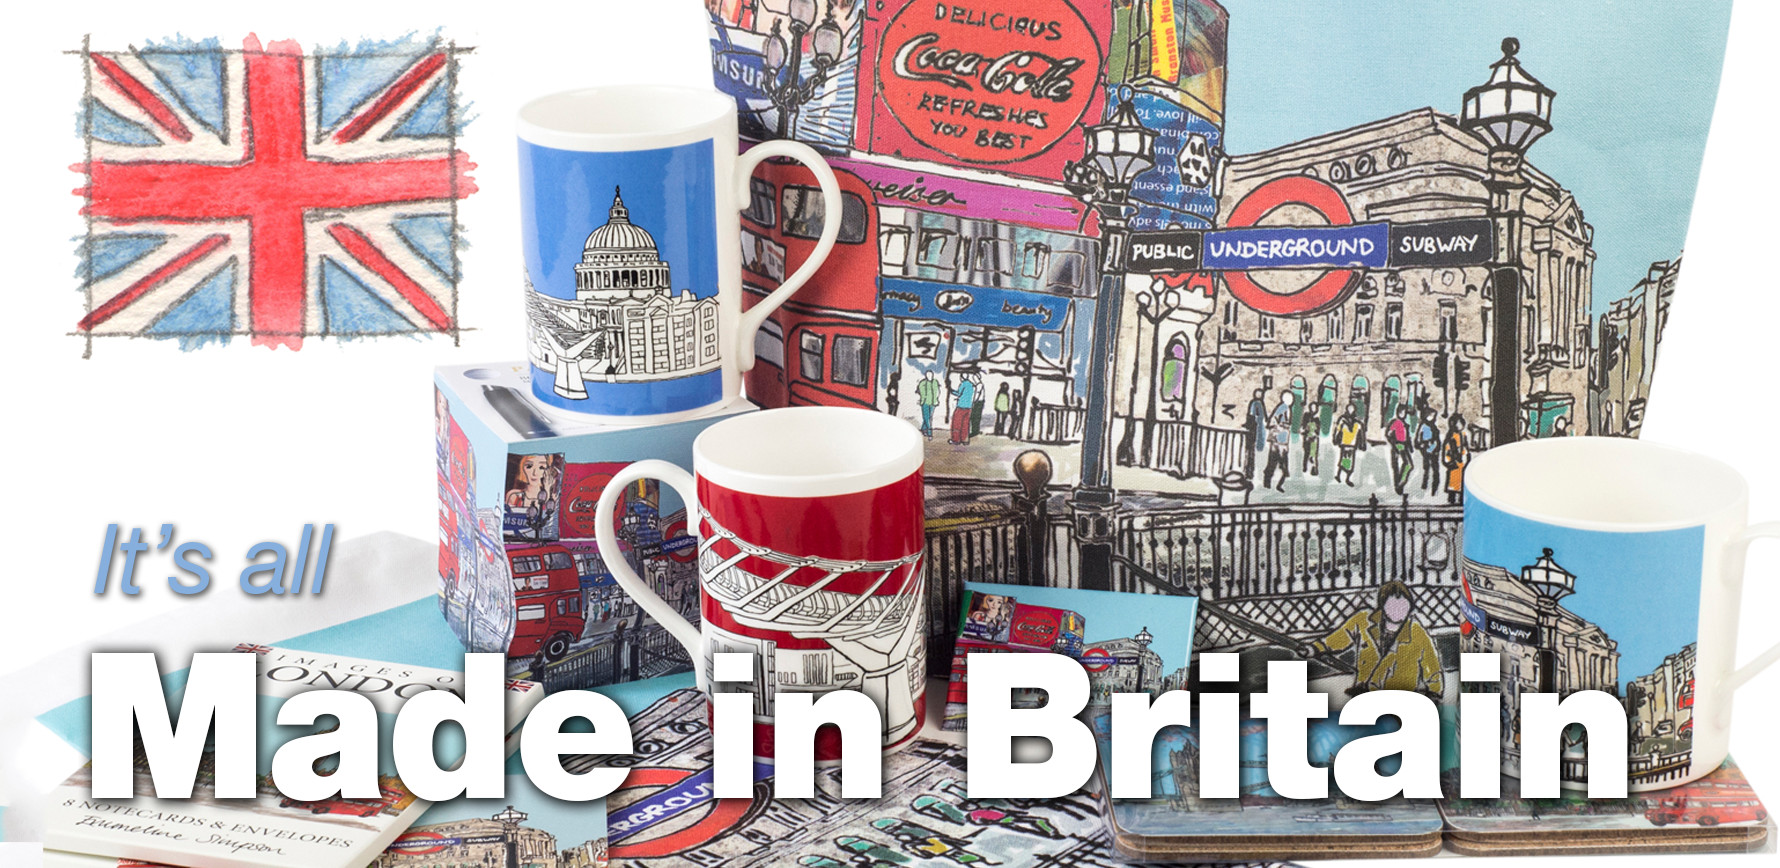 Everything made in Britain